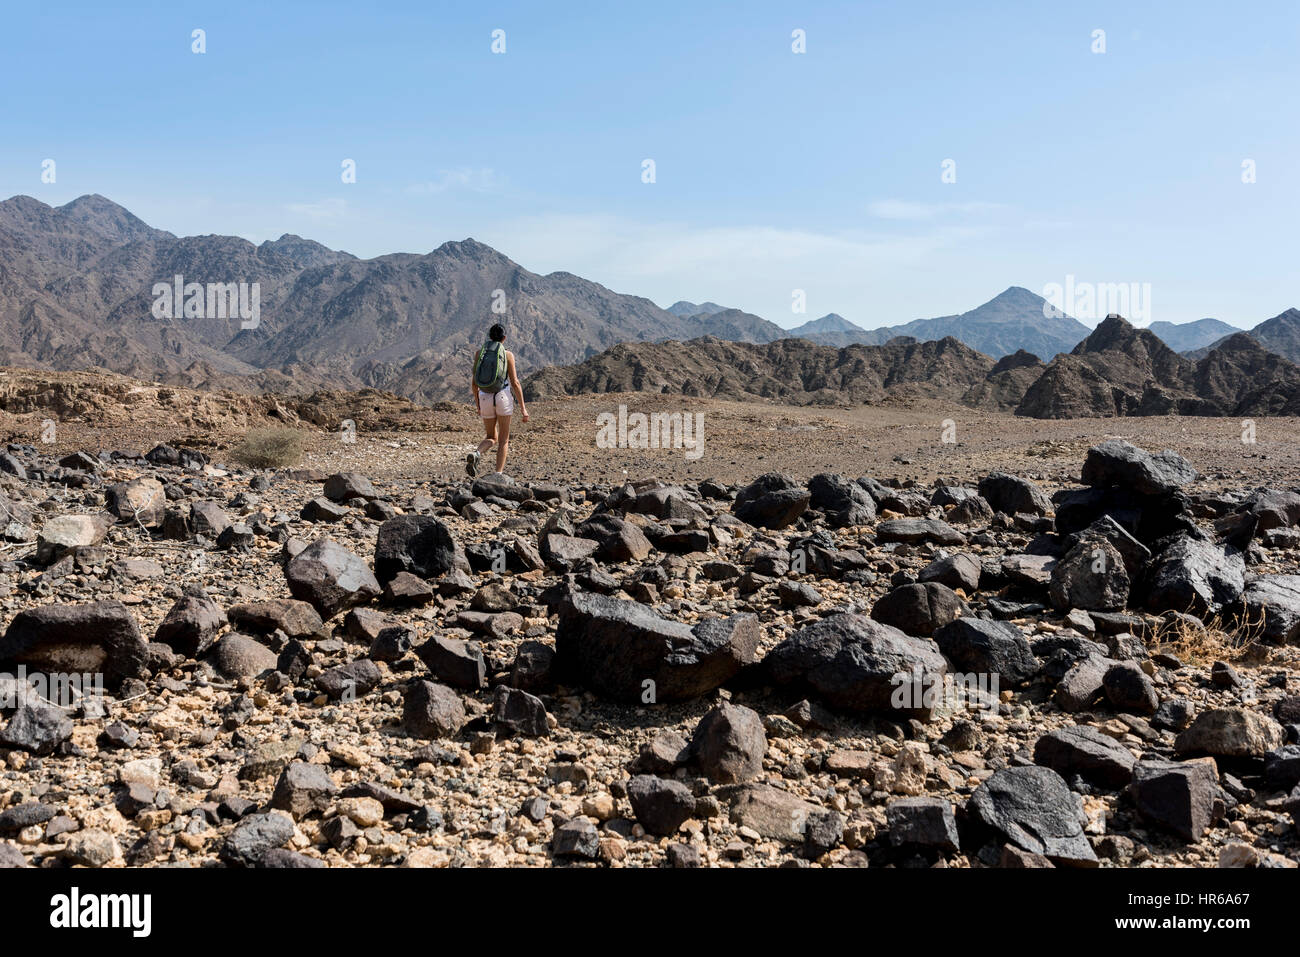 Woman trekking in a Wadi (Dry mountains) Stock Photo